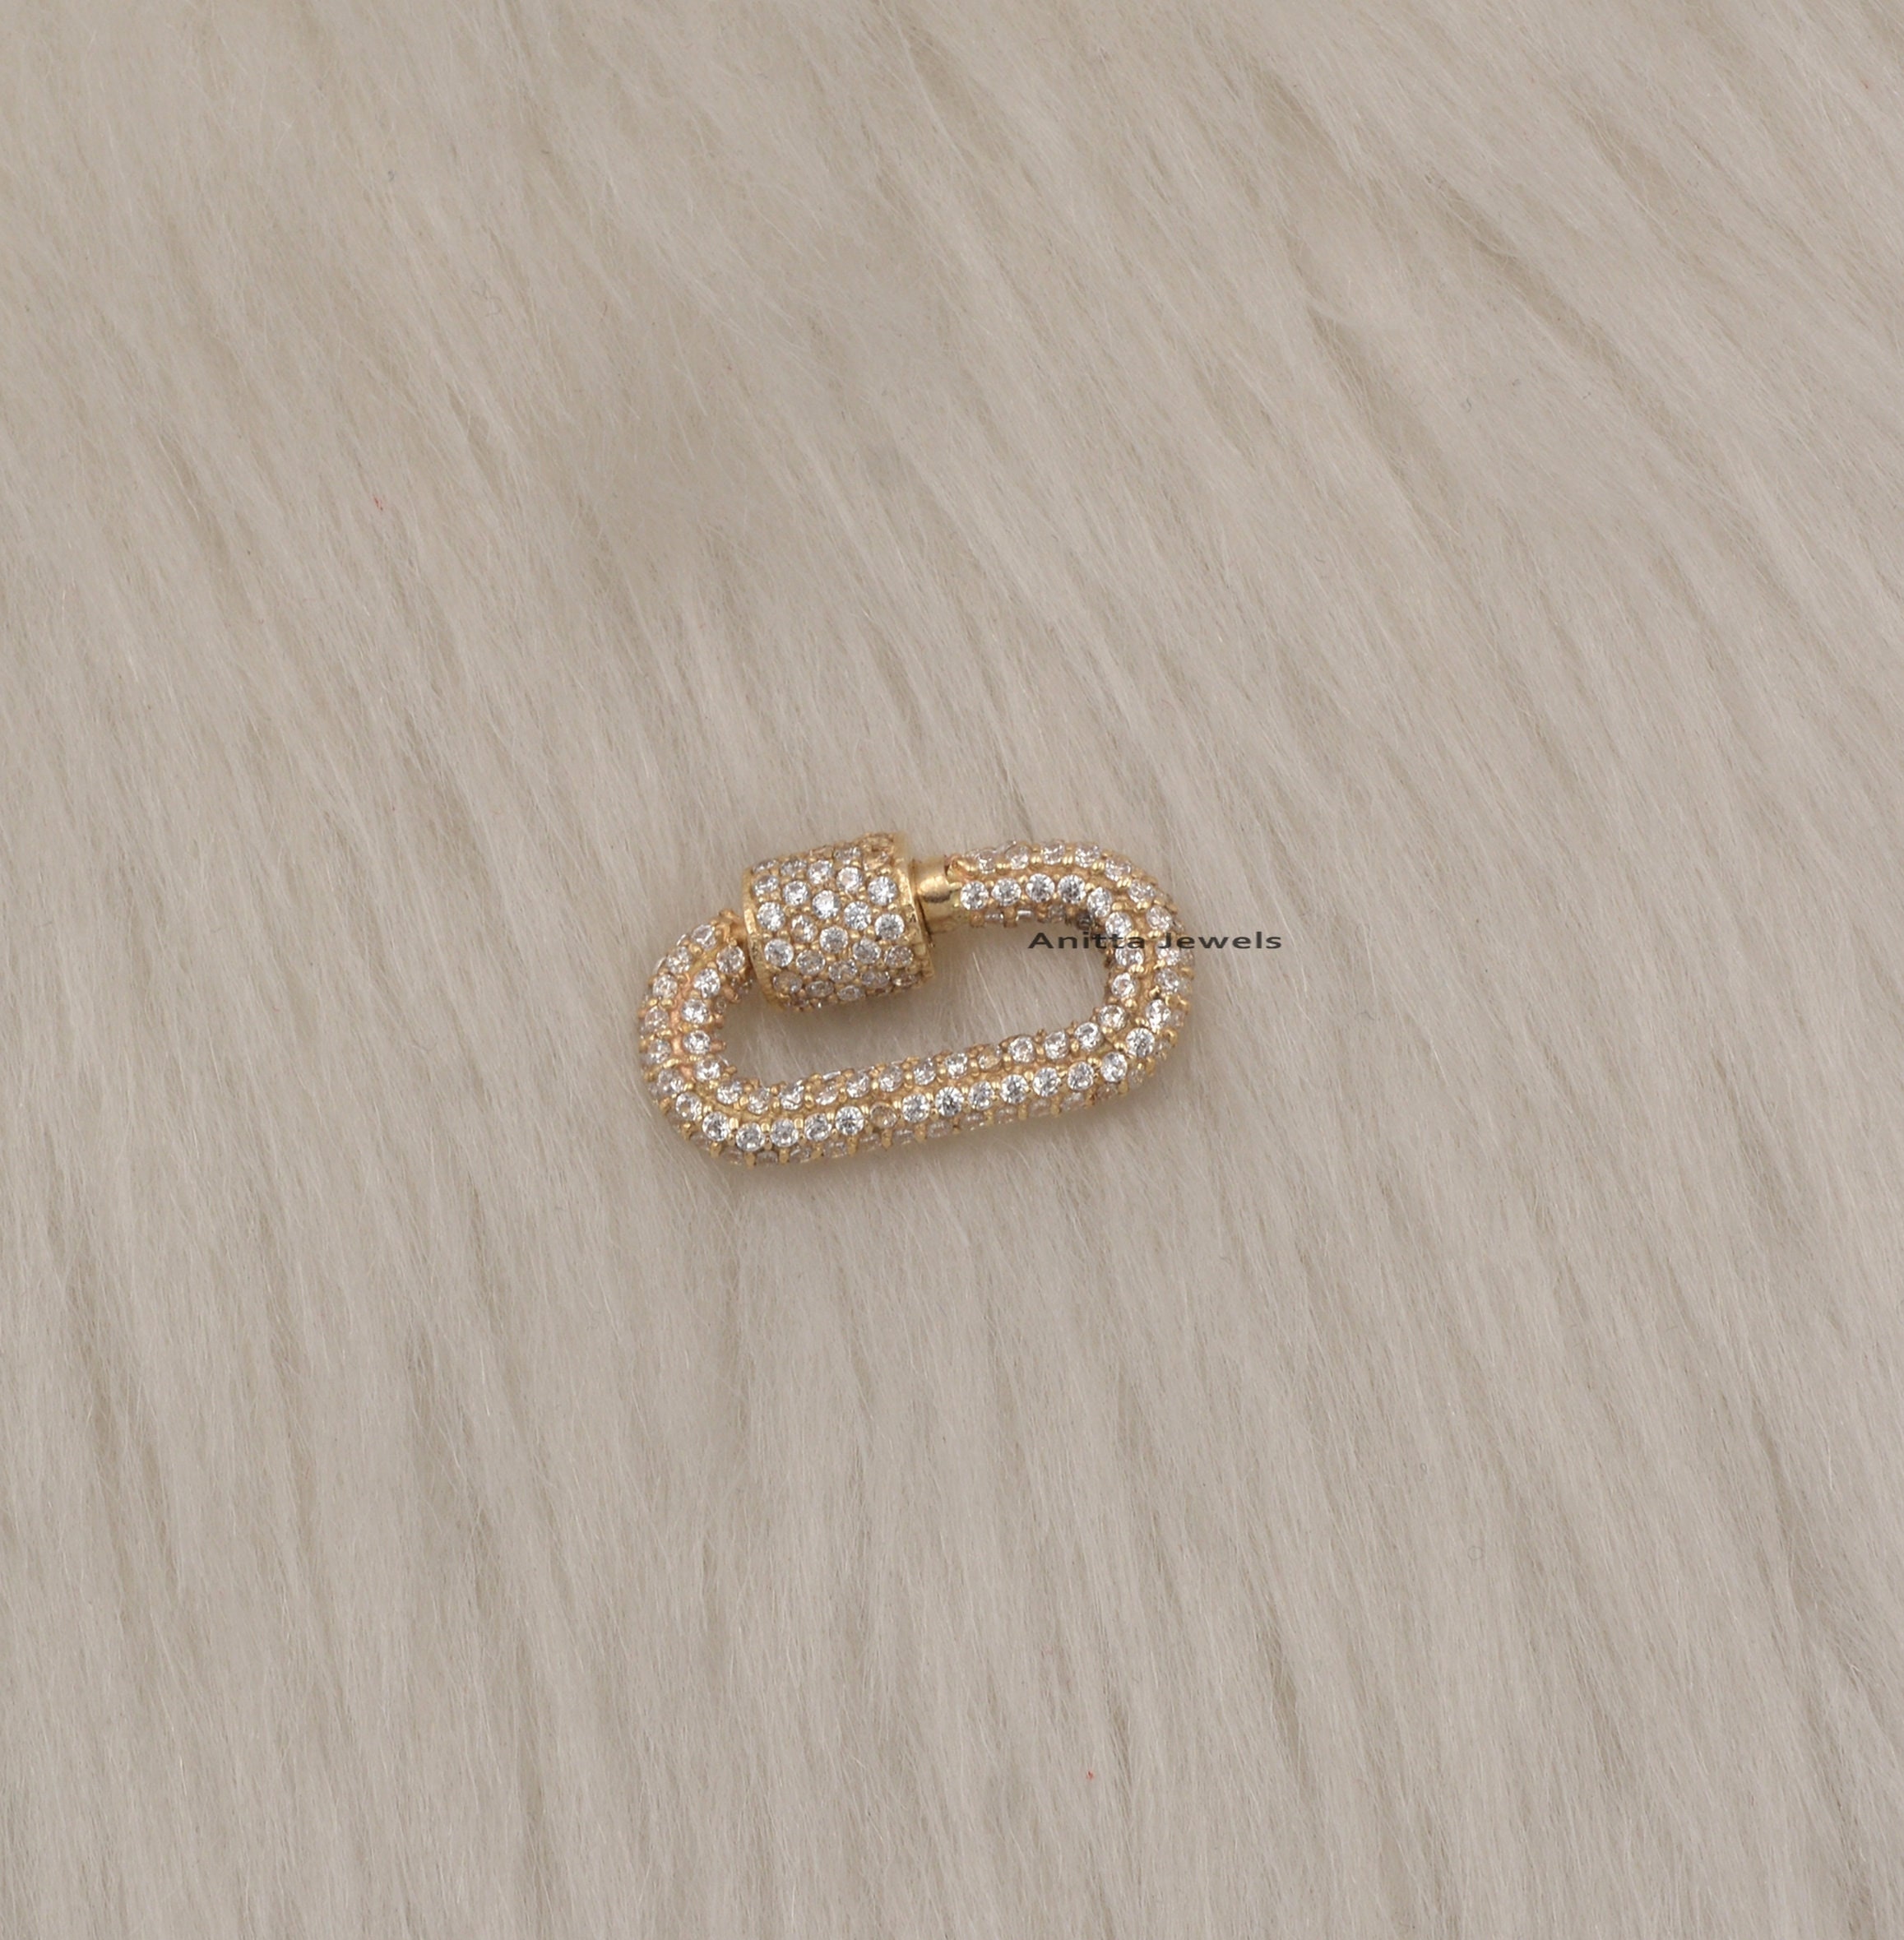  14k Solid Gold Carabiner Lock, Pave Diamond Carabiner Lock,  21mm Carabiner Lock, Carabiner Lock Jewelry, Screw Carabiner Lock Jewelry  (Yellow Gold) : Handmade Products